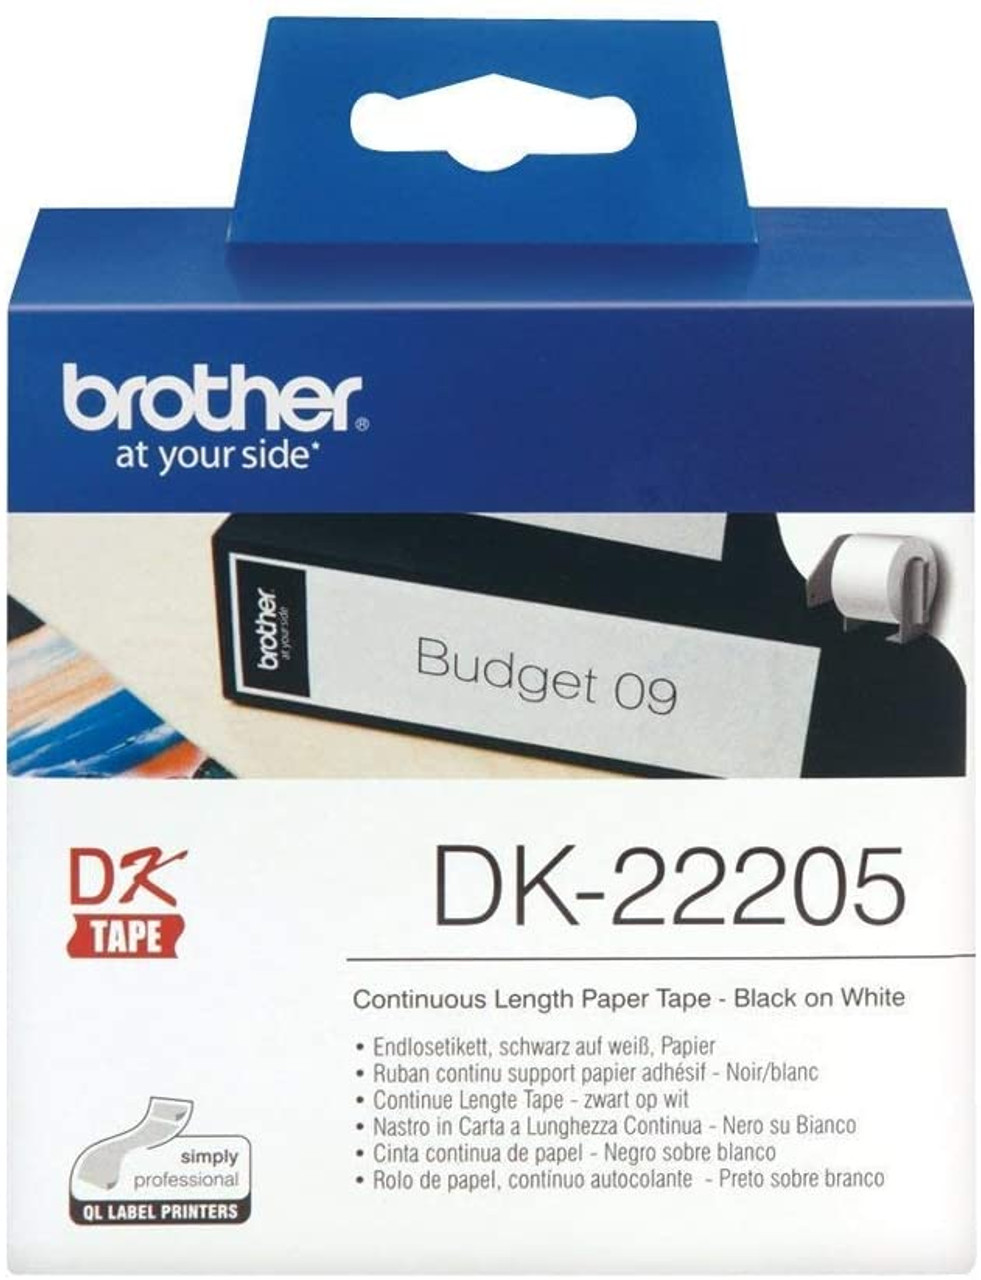 Brother TD4420DN 4-inch Thermal Desktop Barcode and Label Printer, 203 dpi, IPS, Standard USB and Serial, Ethernet LAN - 4